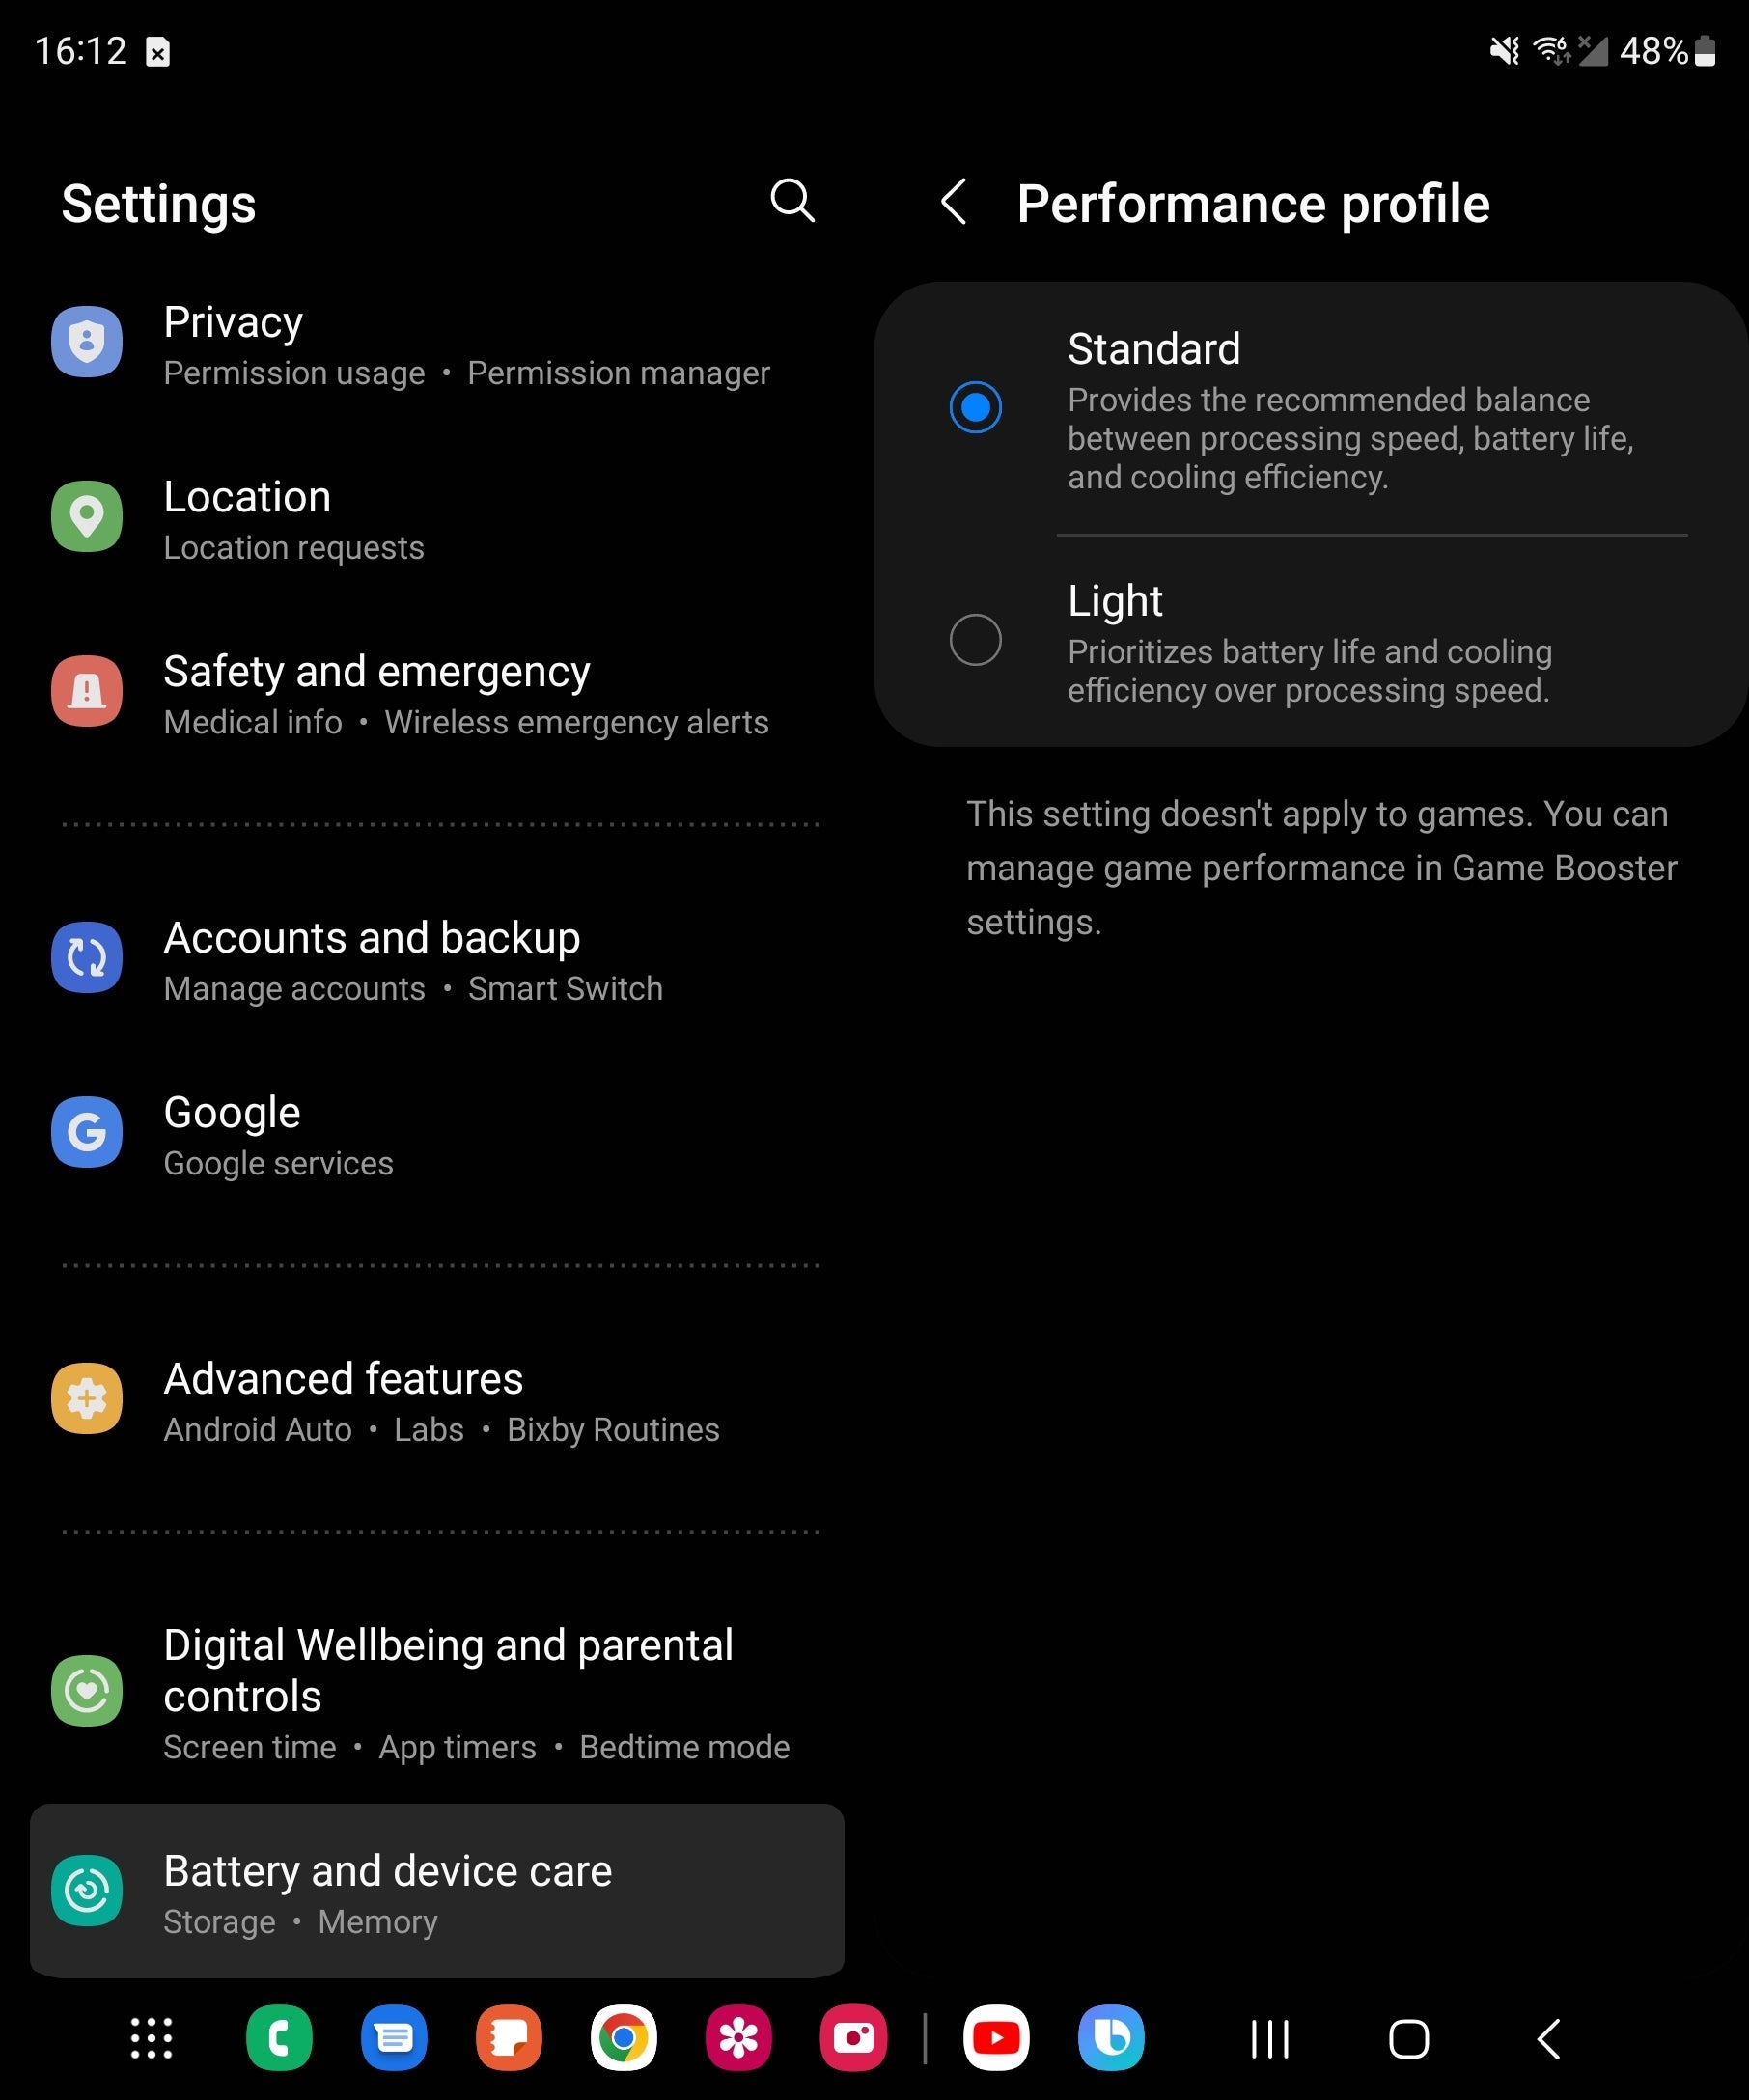 The new Z Fold 4 performance profile - Samsung's new Galaxy Z Fold 4 'Light' performance profile boosts battery life